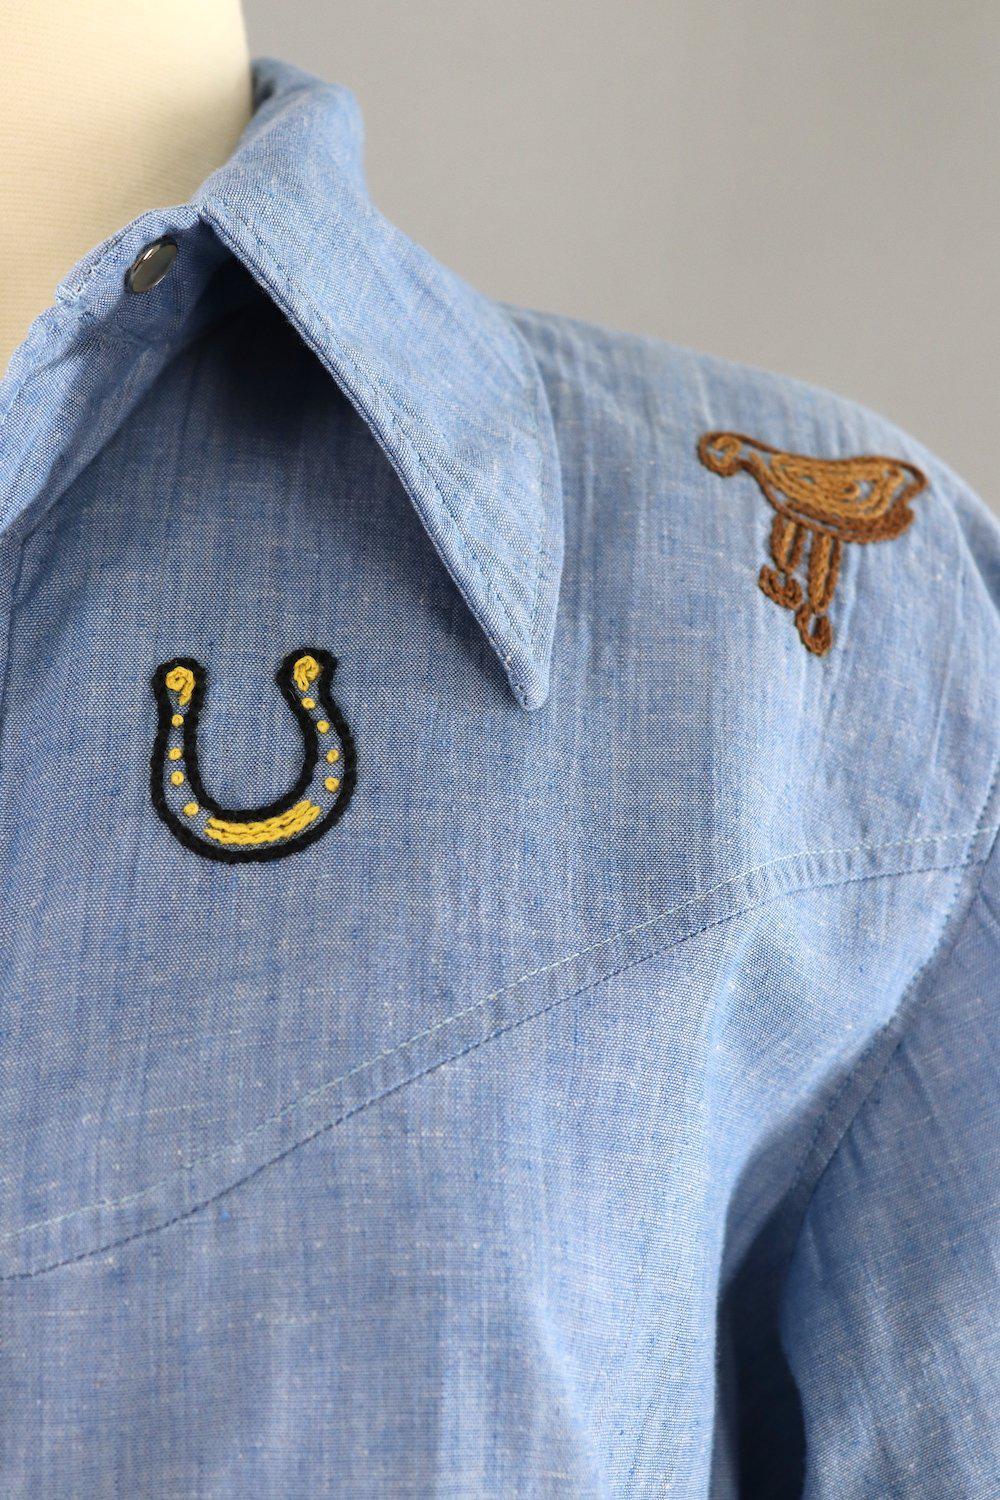 Vintage Chambray Western Shirt with Cowboy and Cactus Embroidery - ThisBlueBird